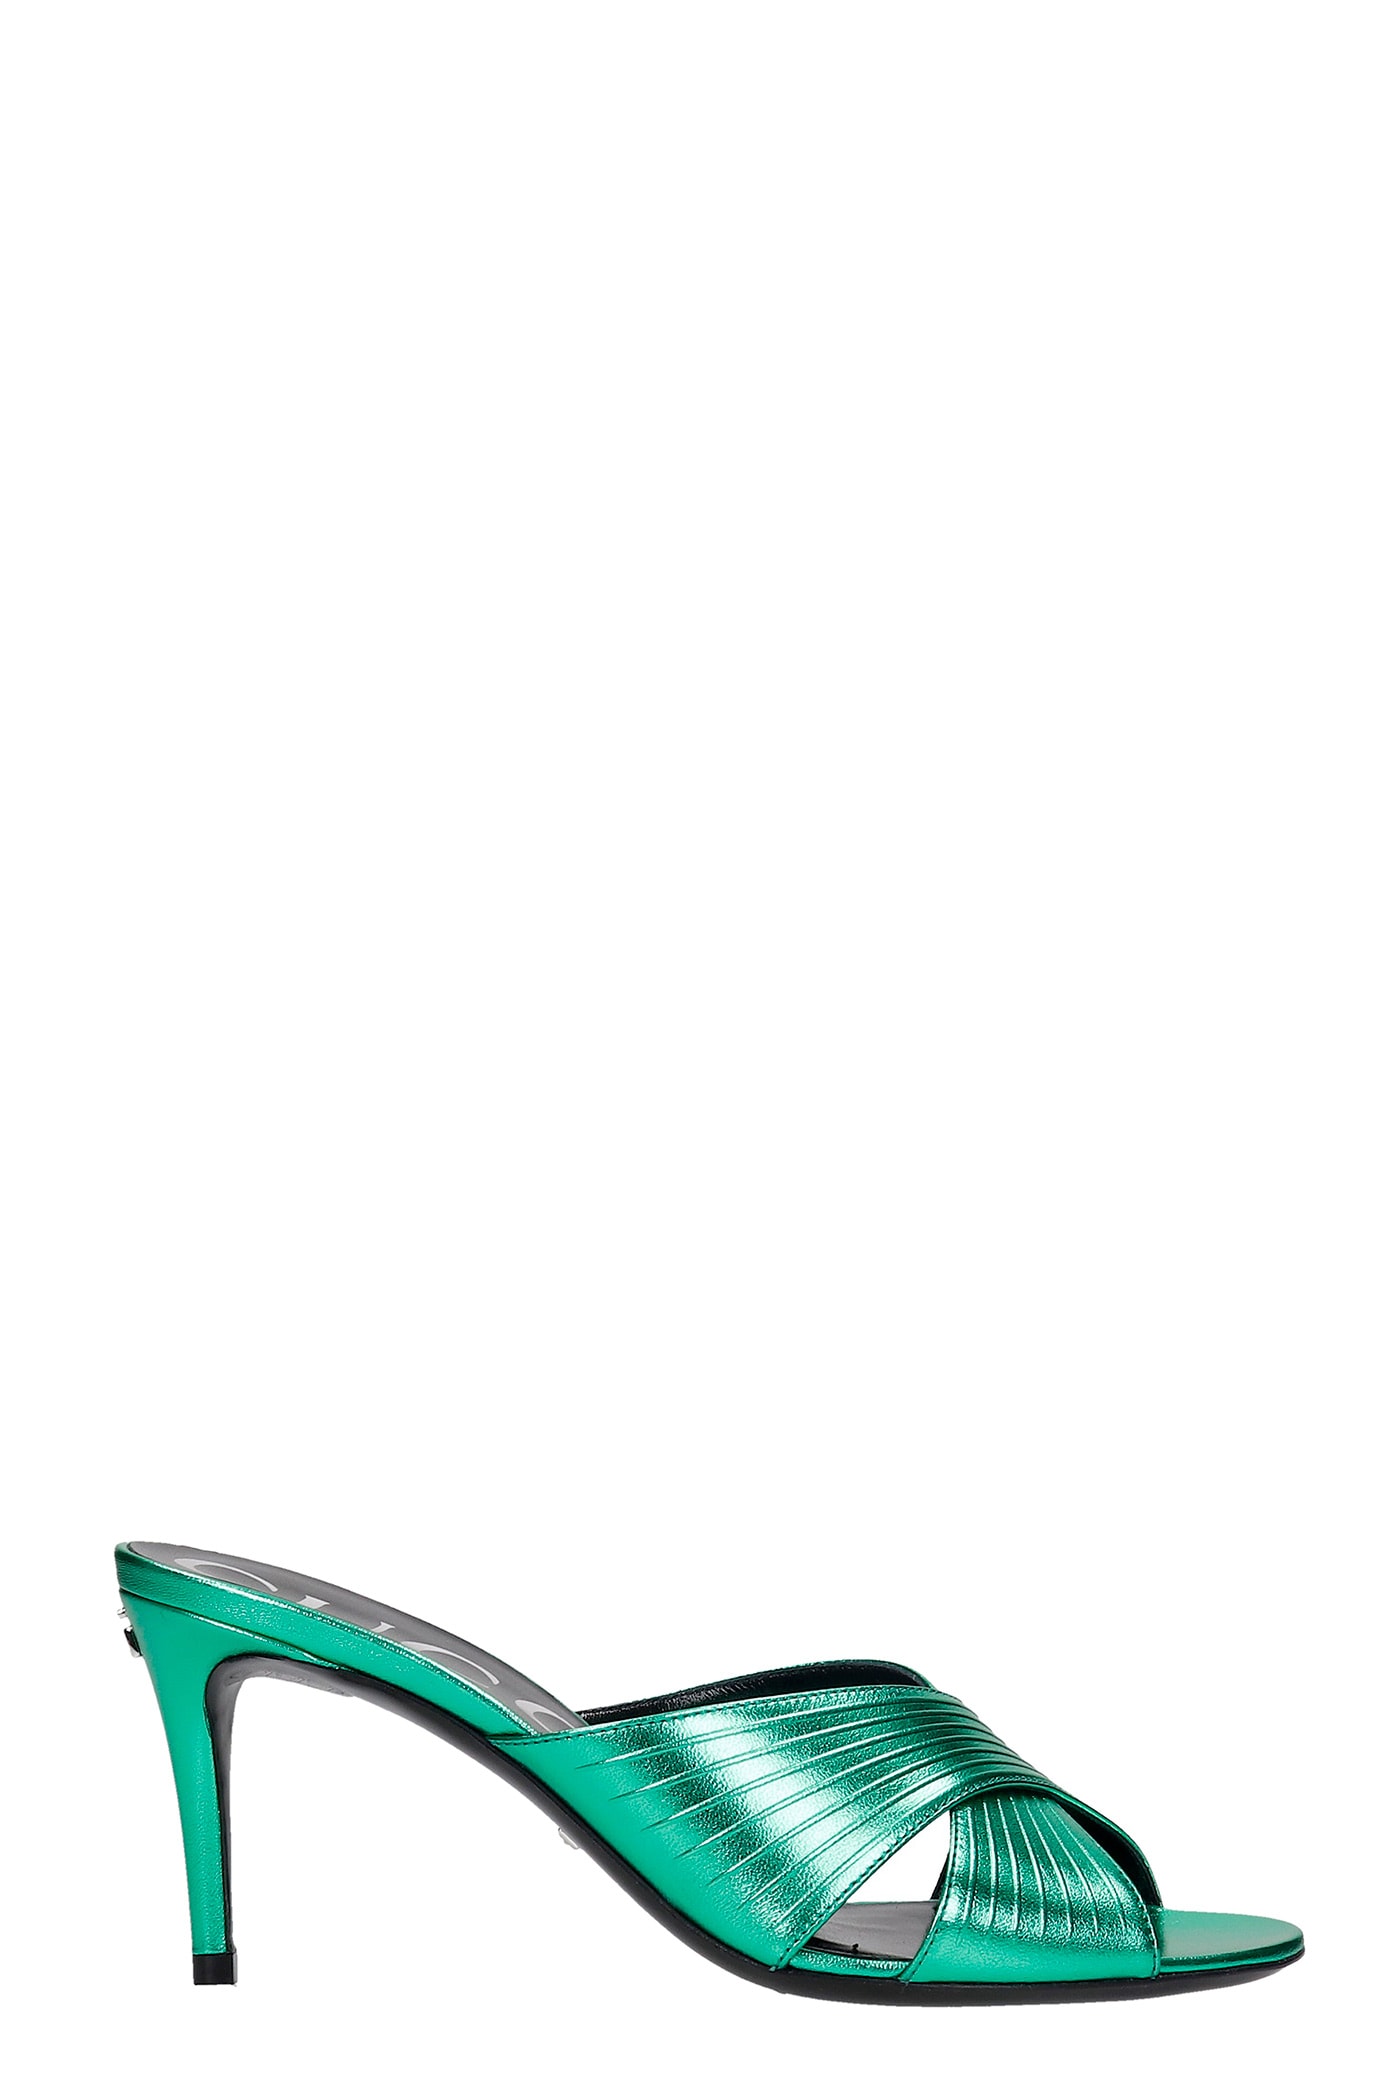 Gucci Sandals In Green Leather